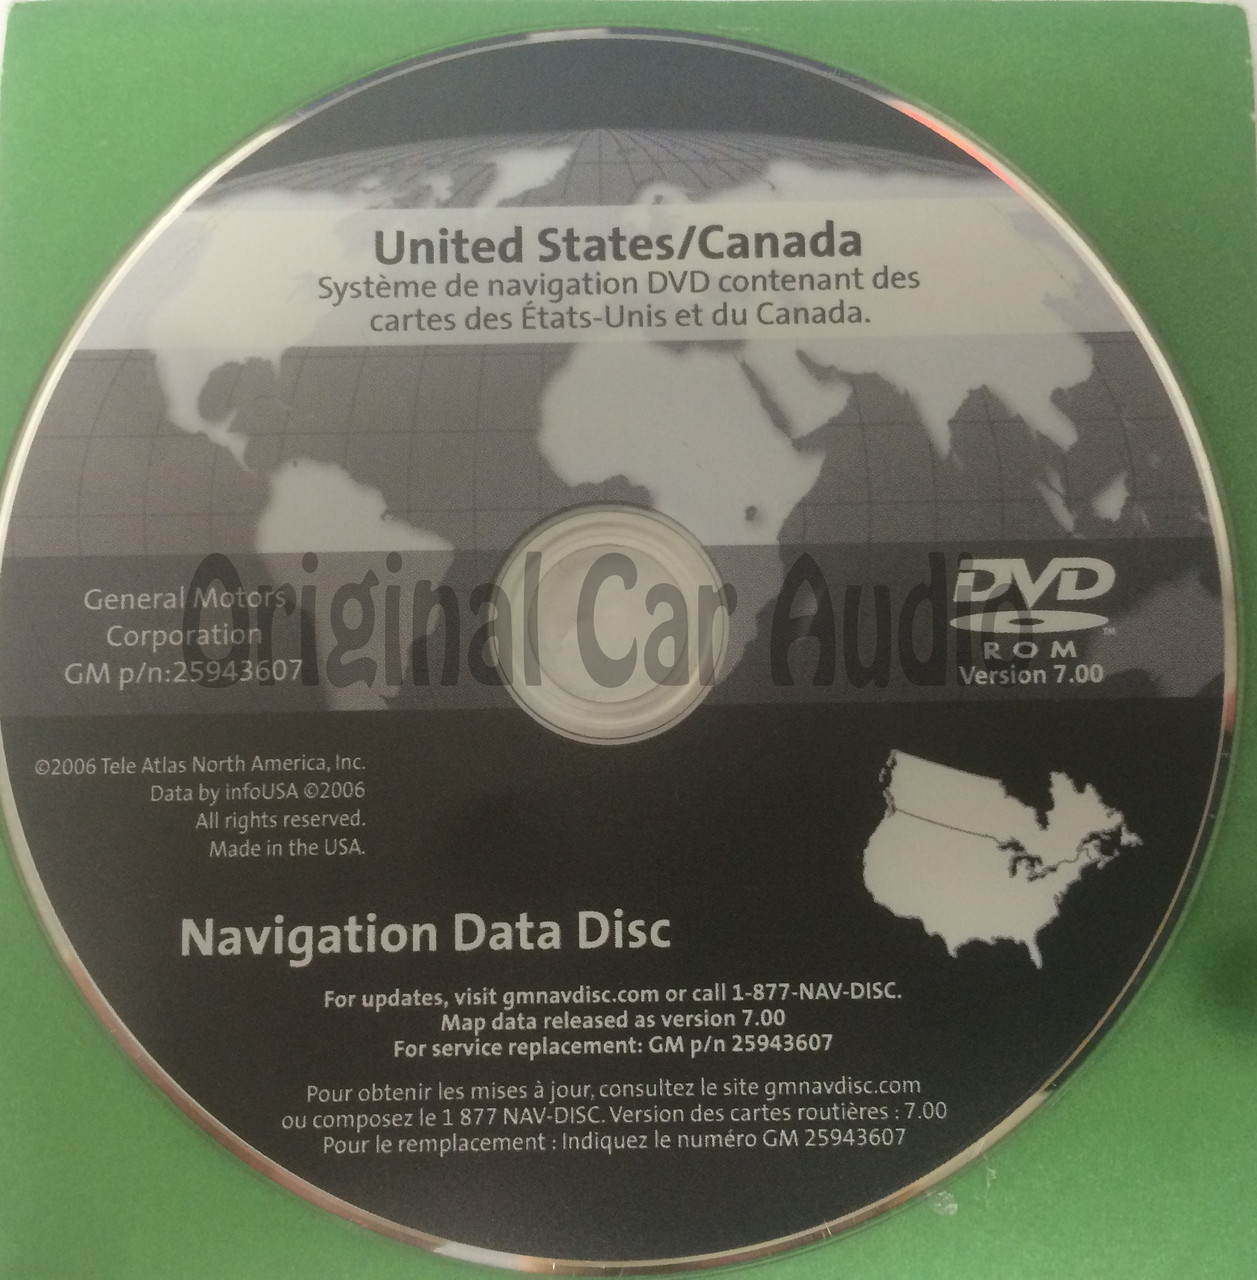 what is the latest version of gm navigation disc